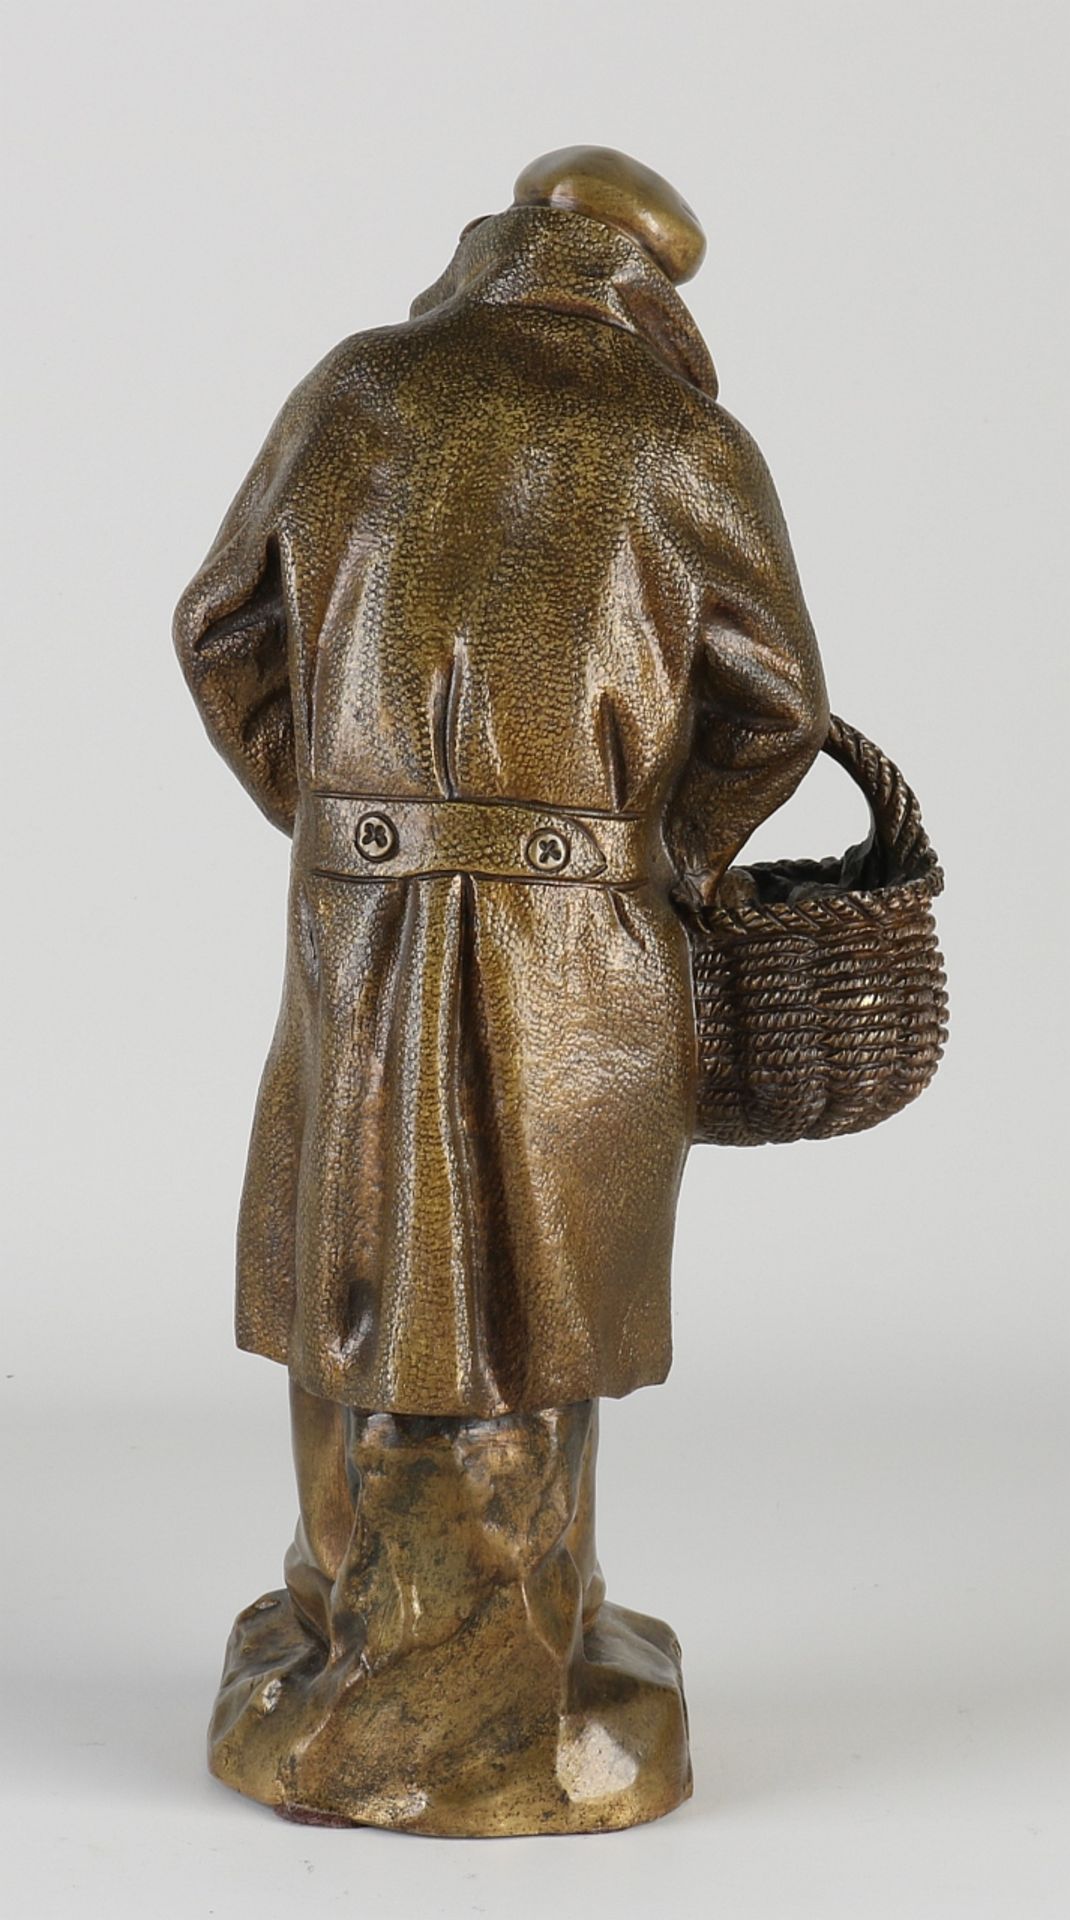 Antique French bronze figure - Image 2 of 2